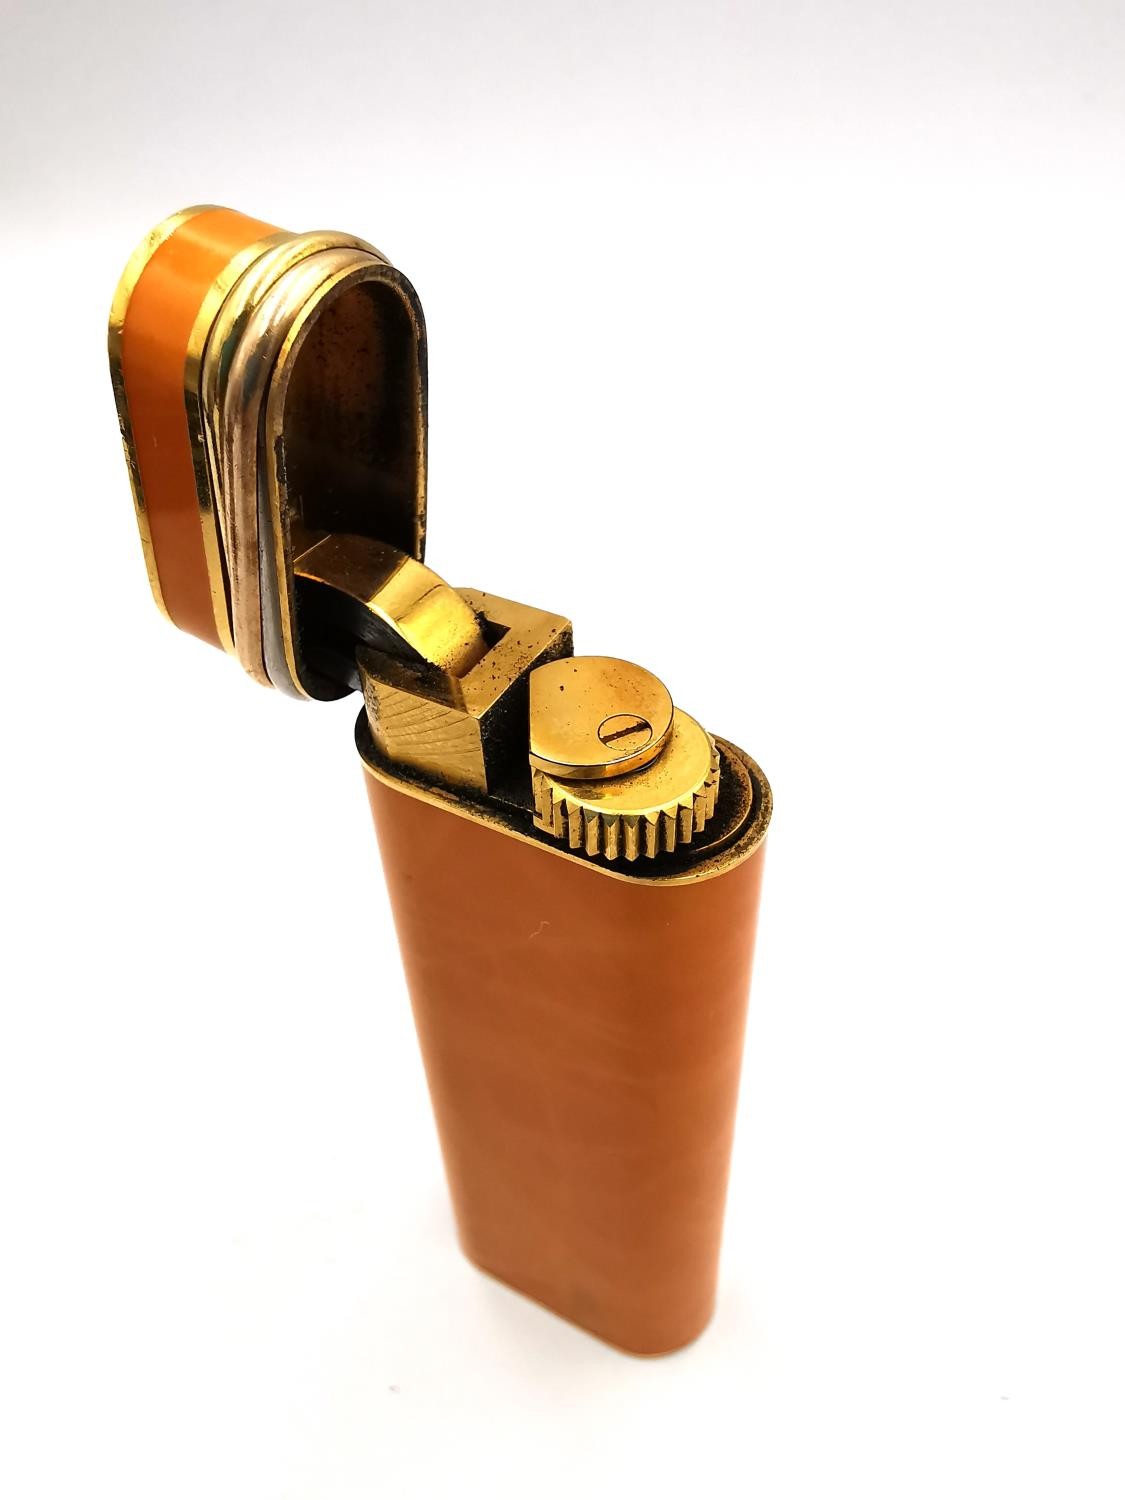 Cartier Must de Cartier lighter with three colour gold plated bands and orange marbled finish. - Image 7 of 7